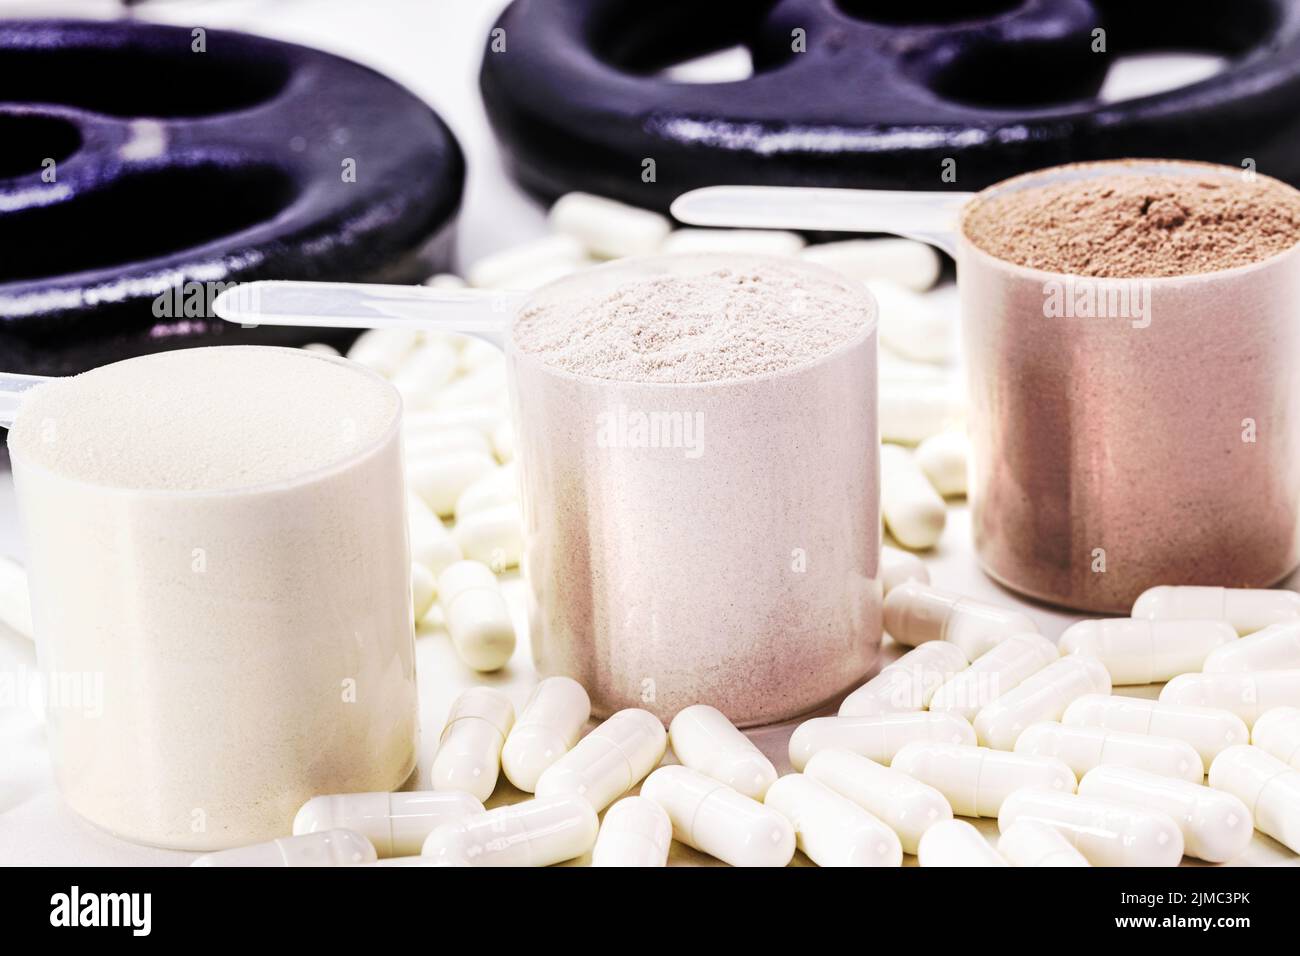 Measuring spoons of dietary supplement, various flavored whey and creatine pills, with weights in the background Stock Photo